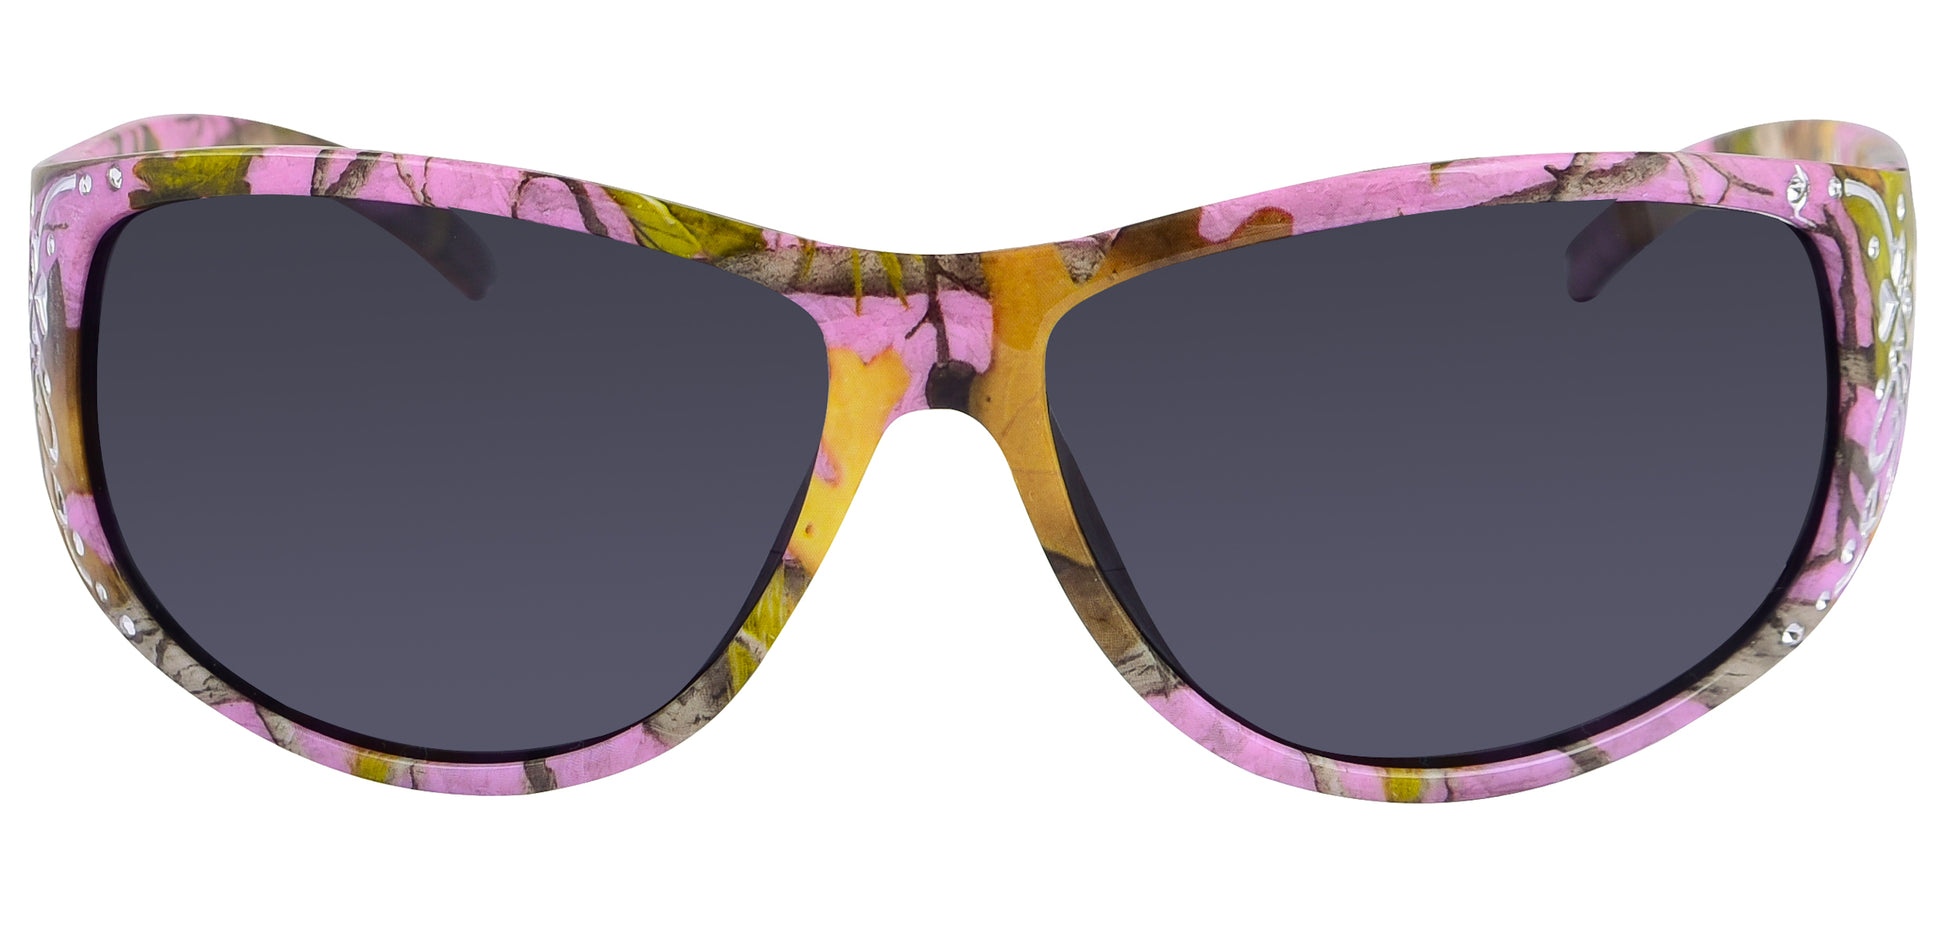 Third image: Hornz Purple Camouflage Polarized Sunglasses Country Girl Style Camo & Free Matching Microfiber Pouch – Purple Camo Frame - Smoke Lens